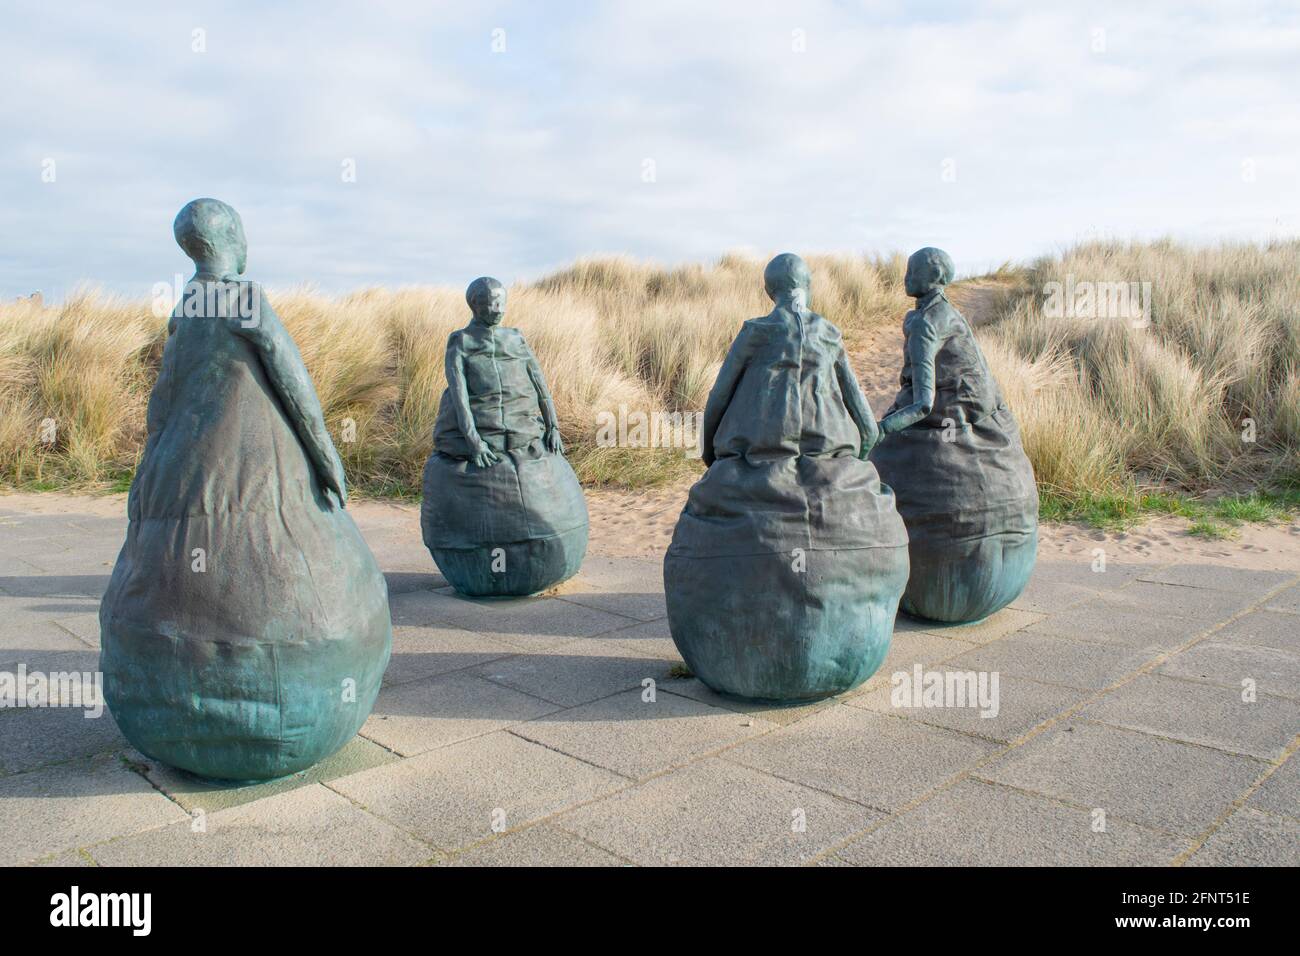 South Shields, UK - March 30, 2021: The Weebles sculptures and statues near Little haven Beach in South Shields. Stock Photo